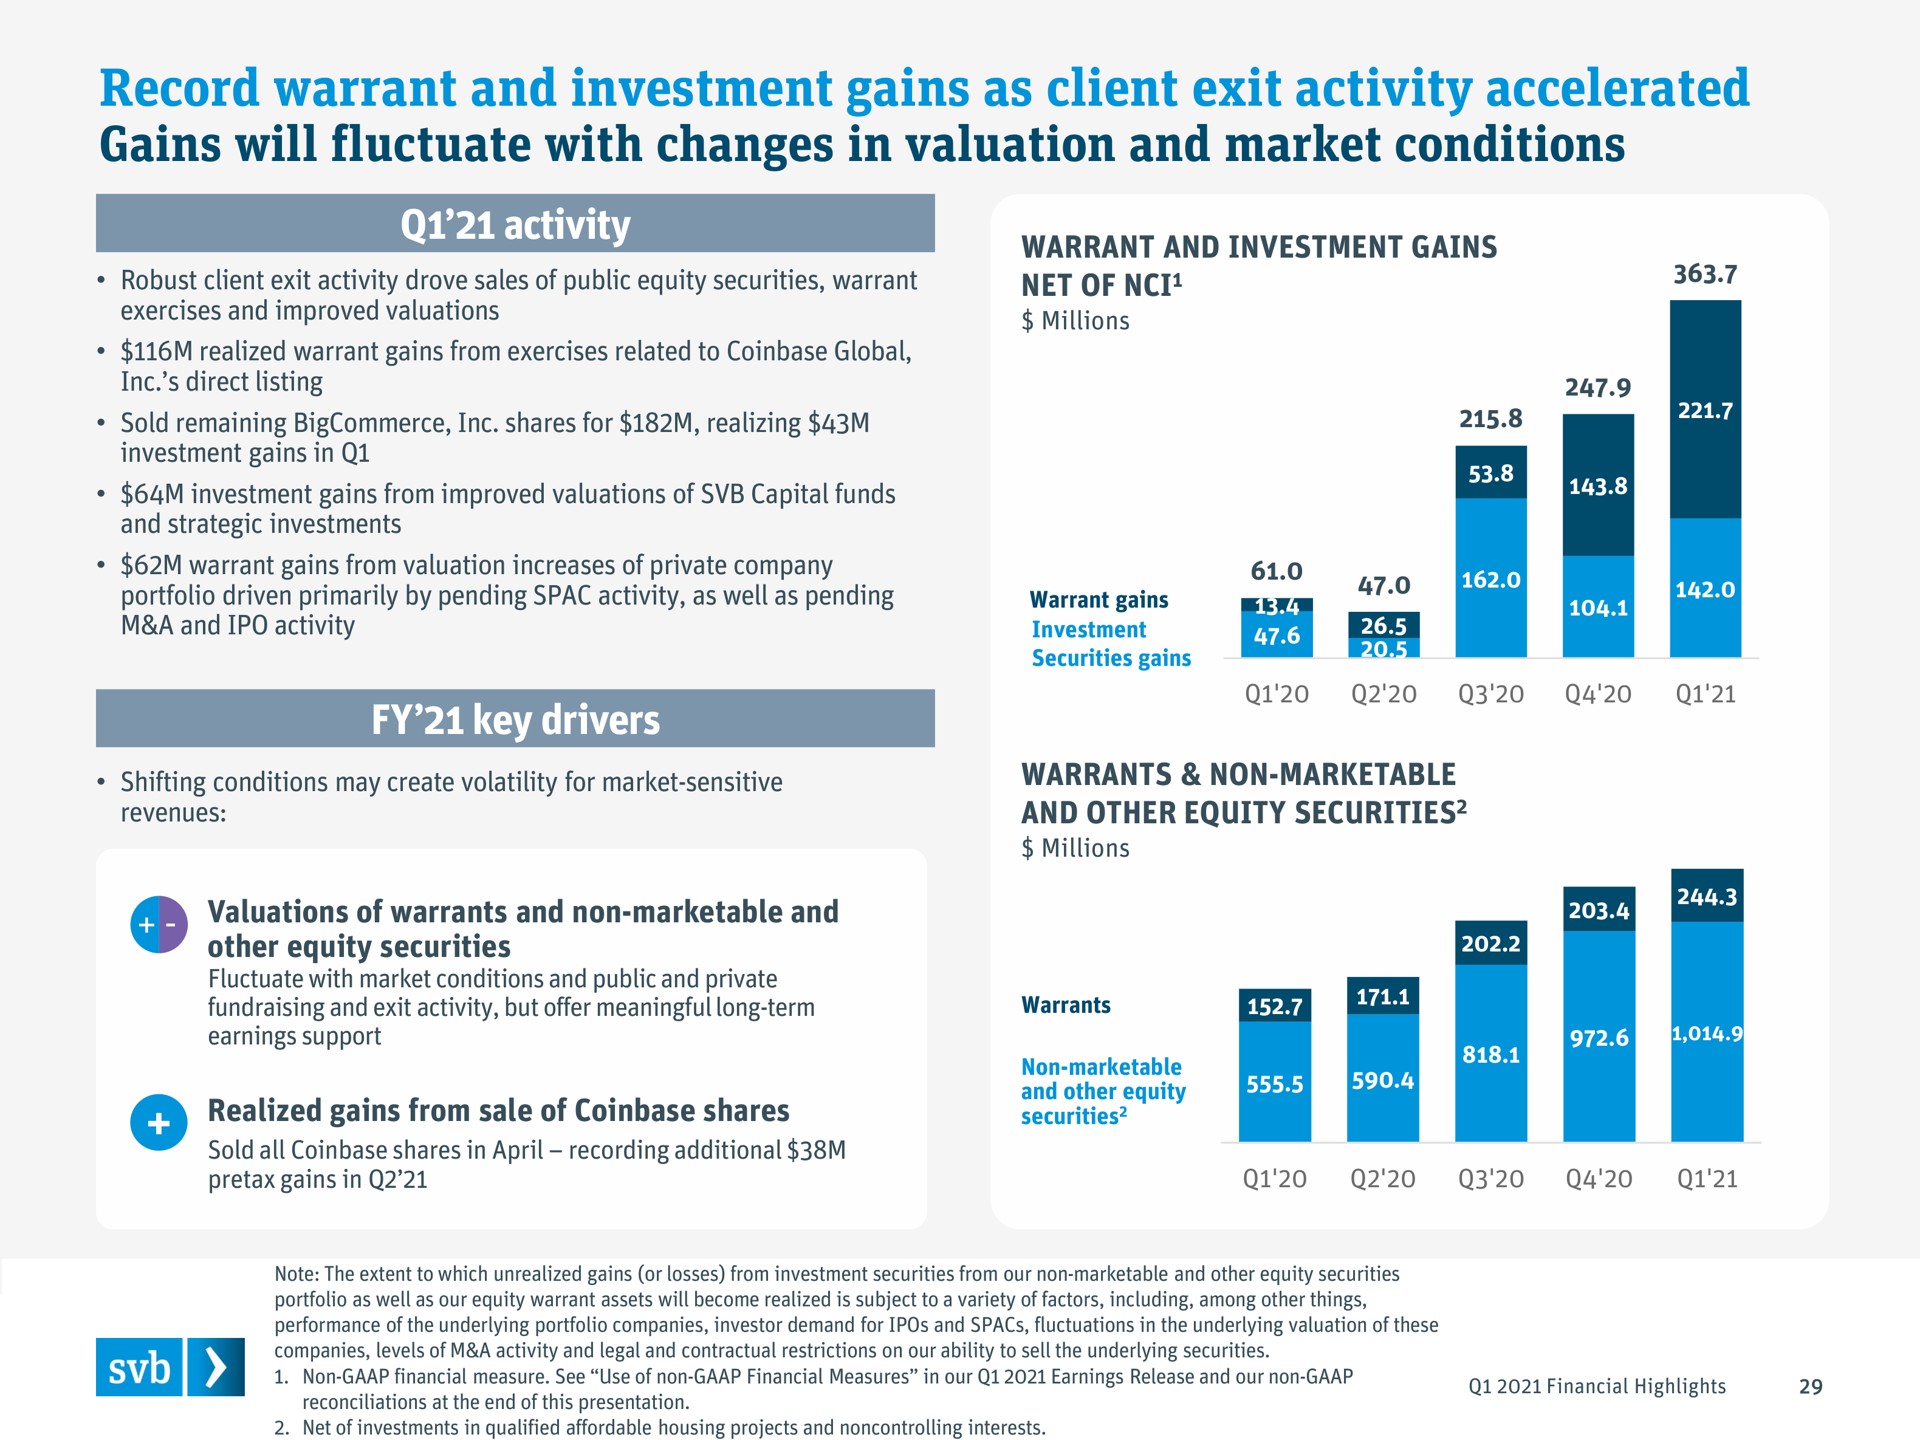 record warrant and investment gains as client exit activity accelerated gains will fluctuate with changes in valuation and market conditions | Silicon Valley Bank